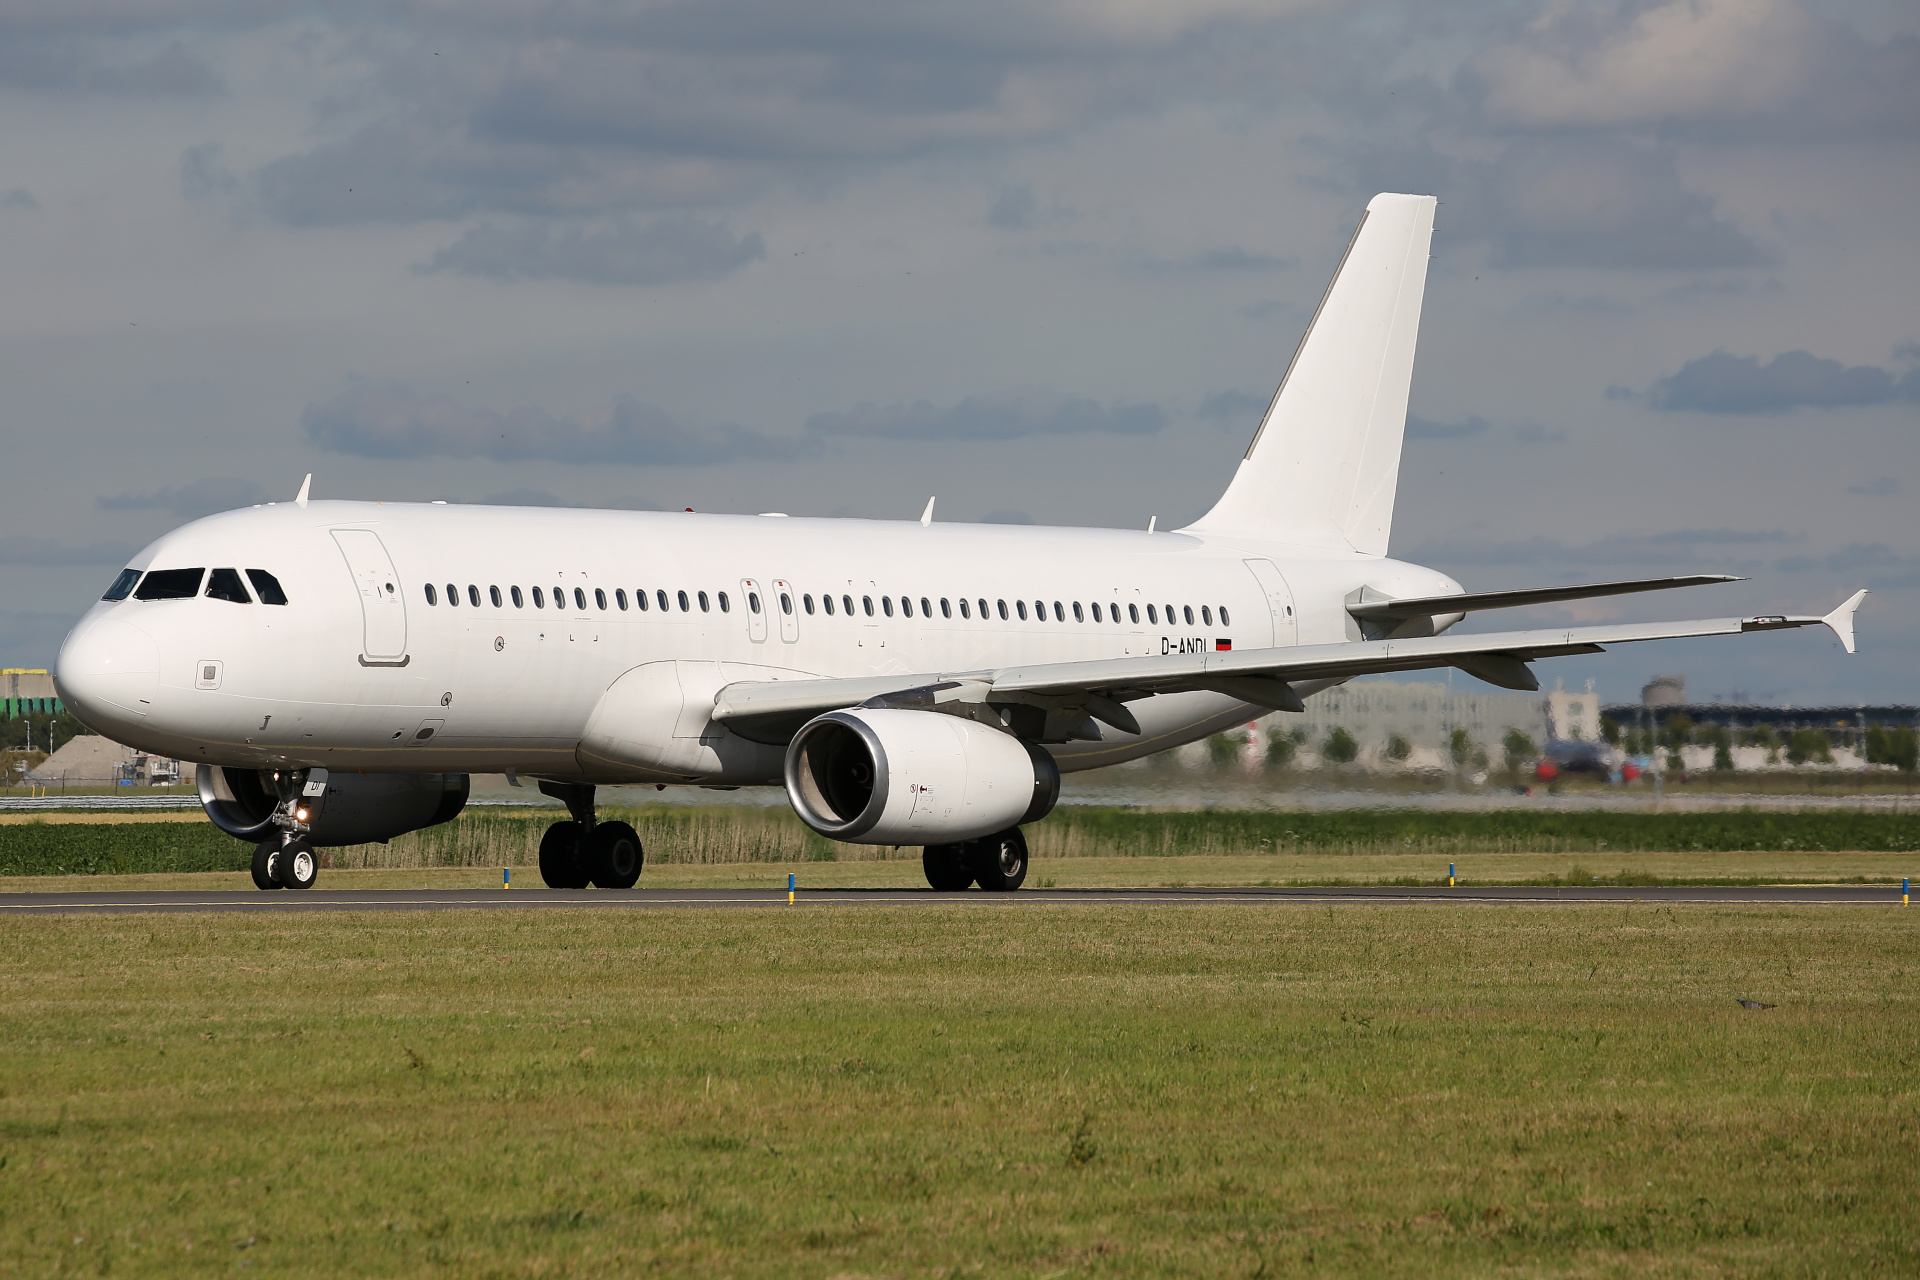 D-ANDI, LEAV Aviation (Aircraft » Schiphol Spotting » Airbus A320-200)